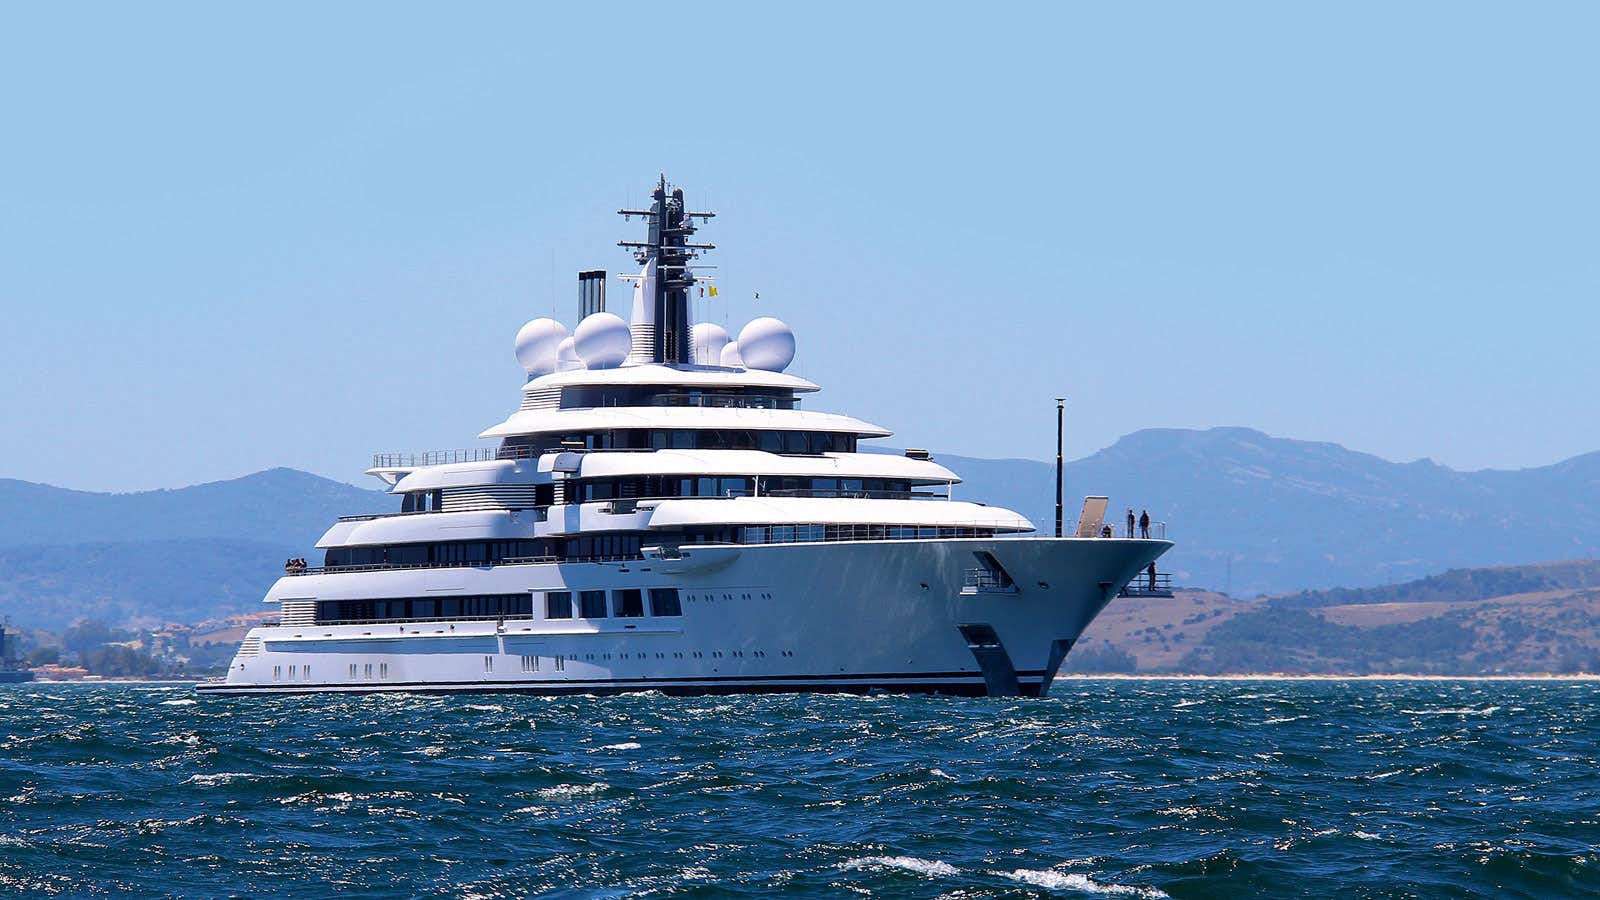 what's the most expensive yacht in the world